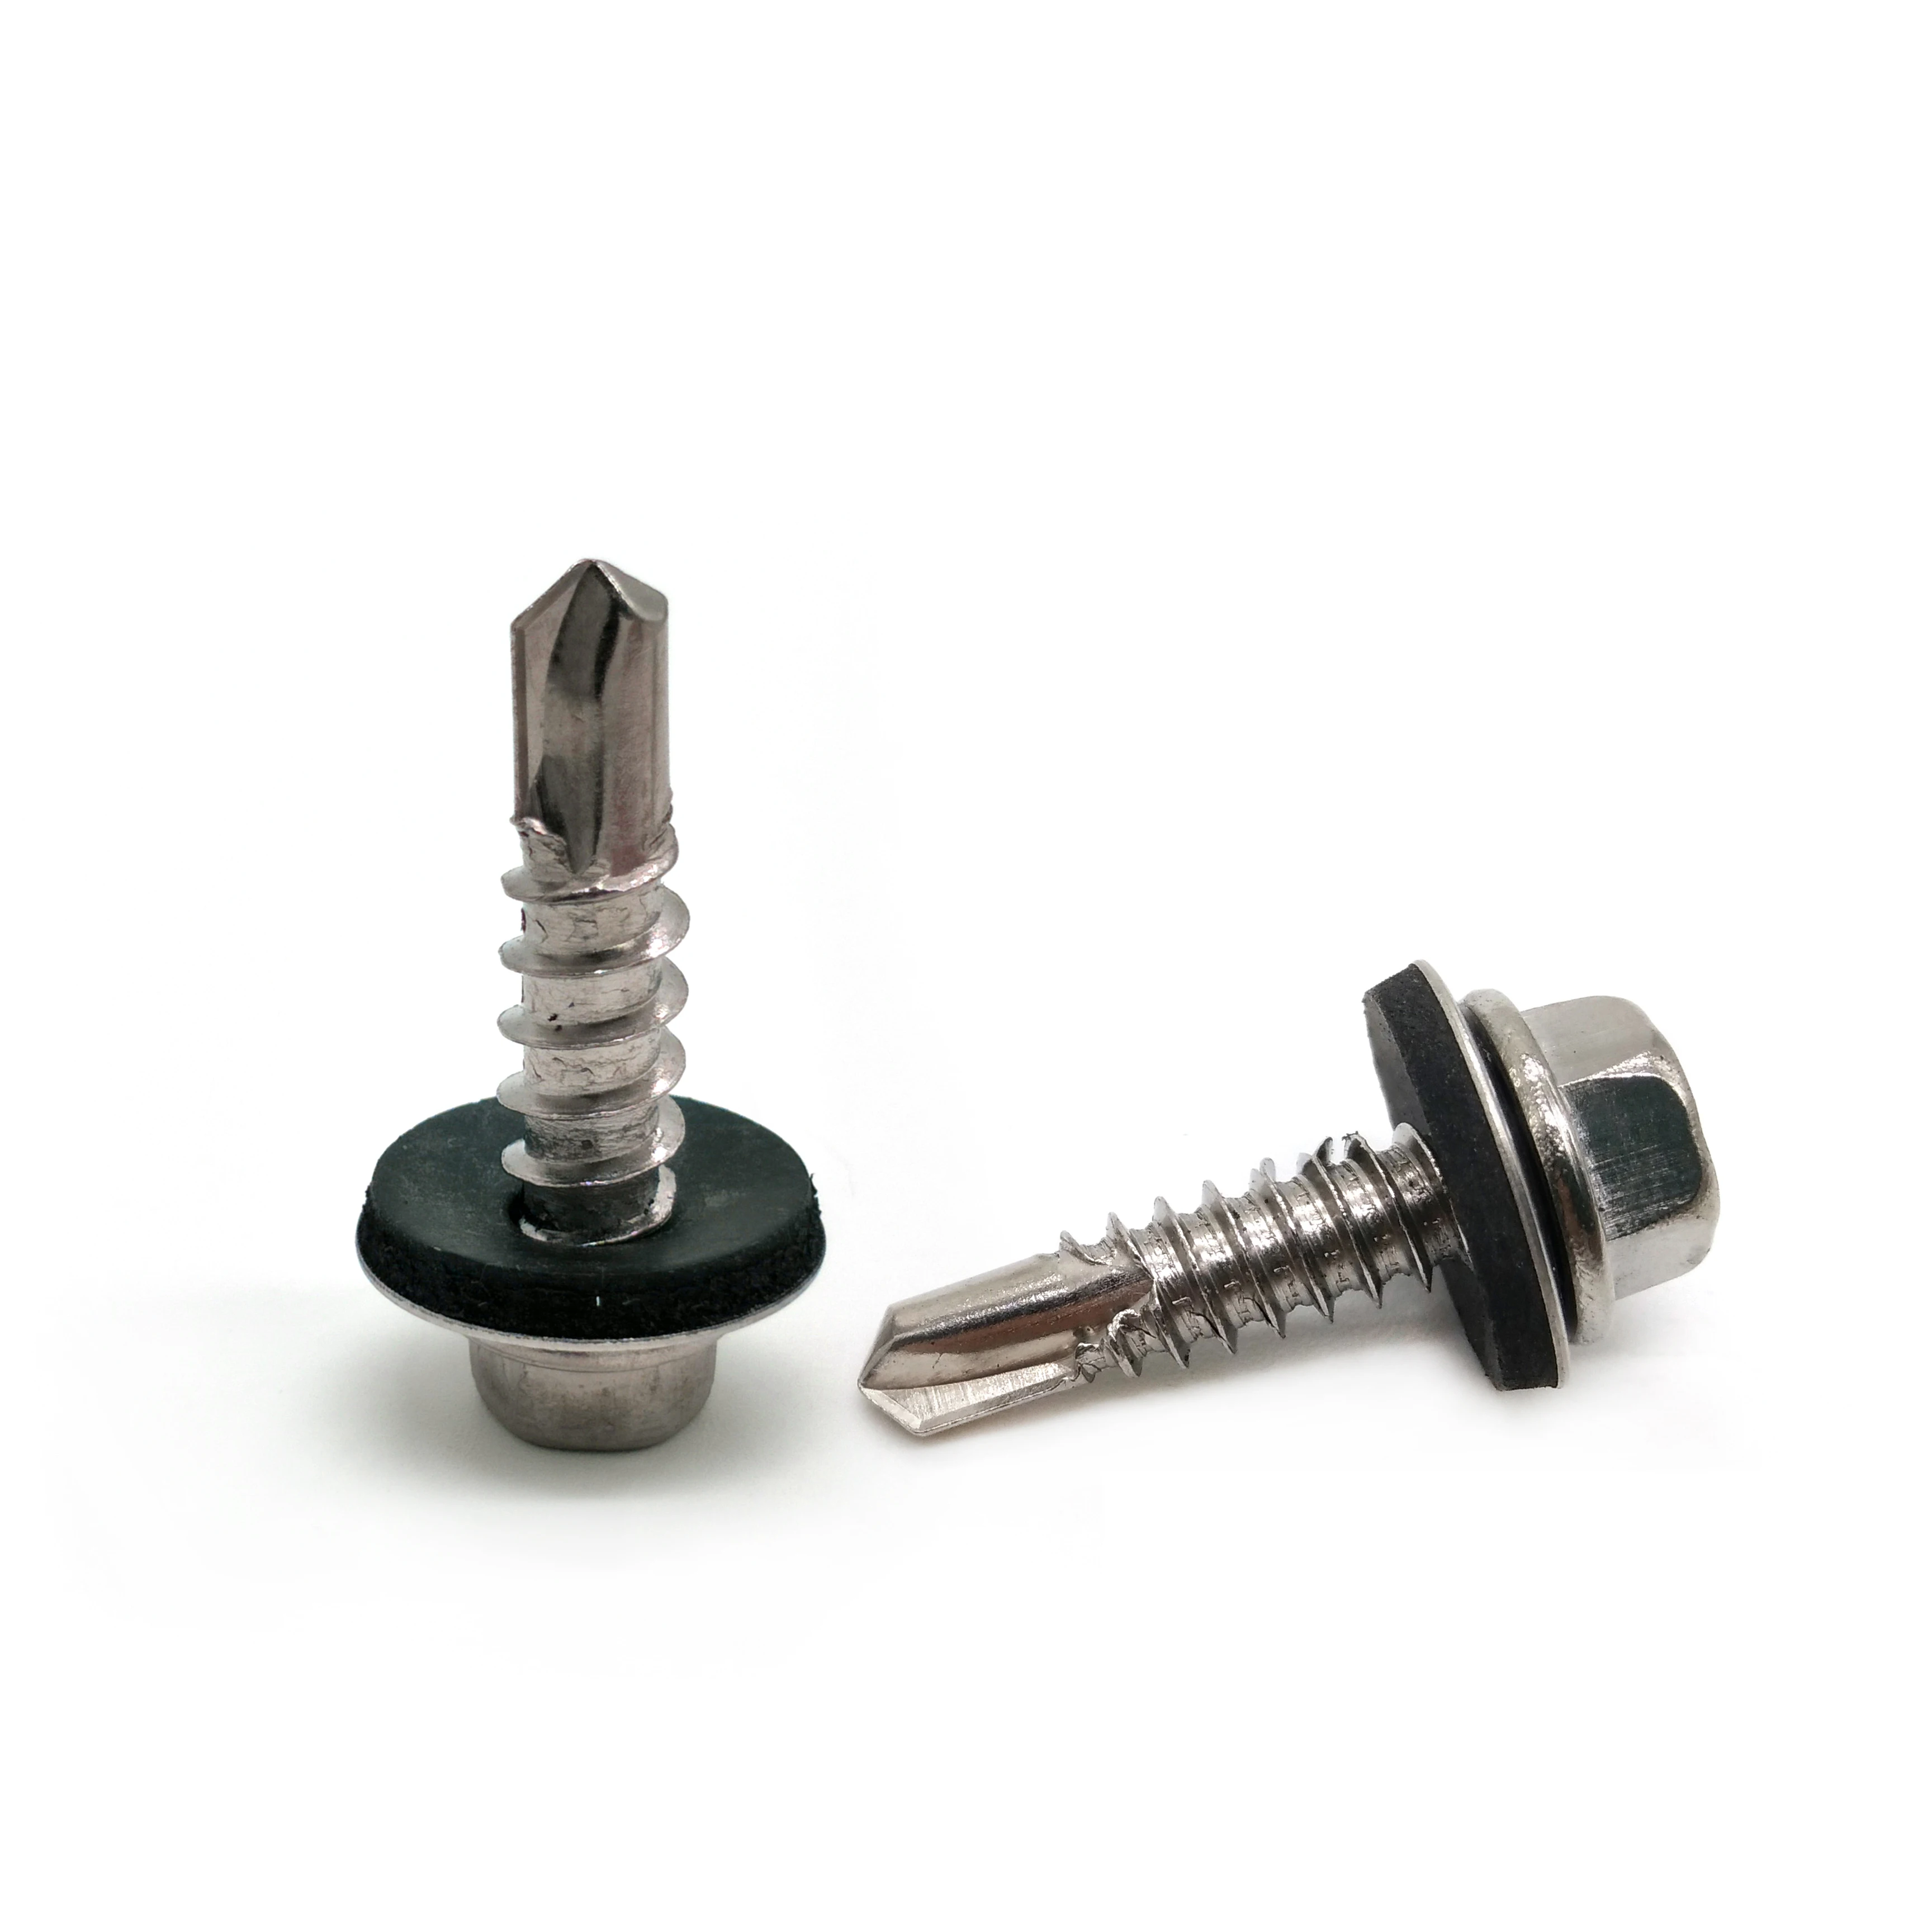 M5 Colored Zinc Hexagon Screws Hex Head Self Tapping Wood Screw & Rubber Washer 